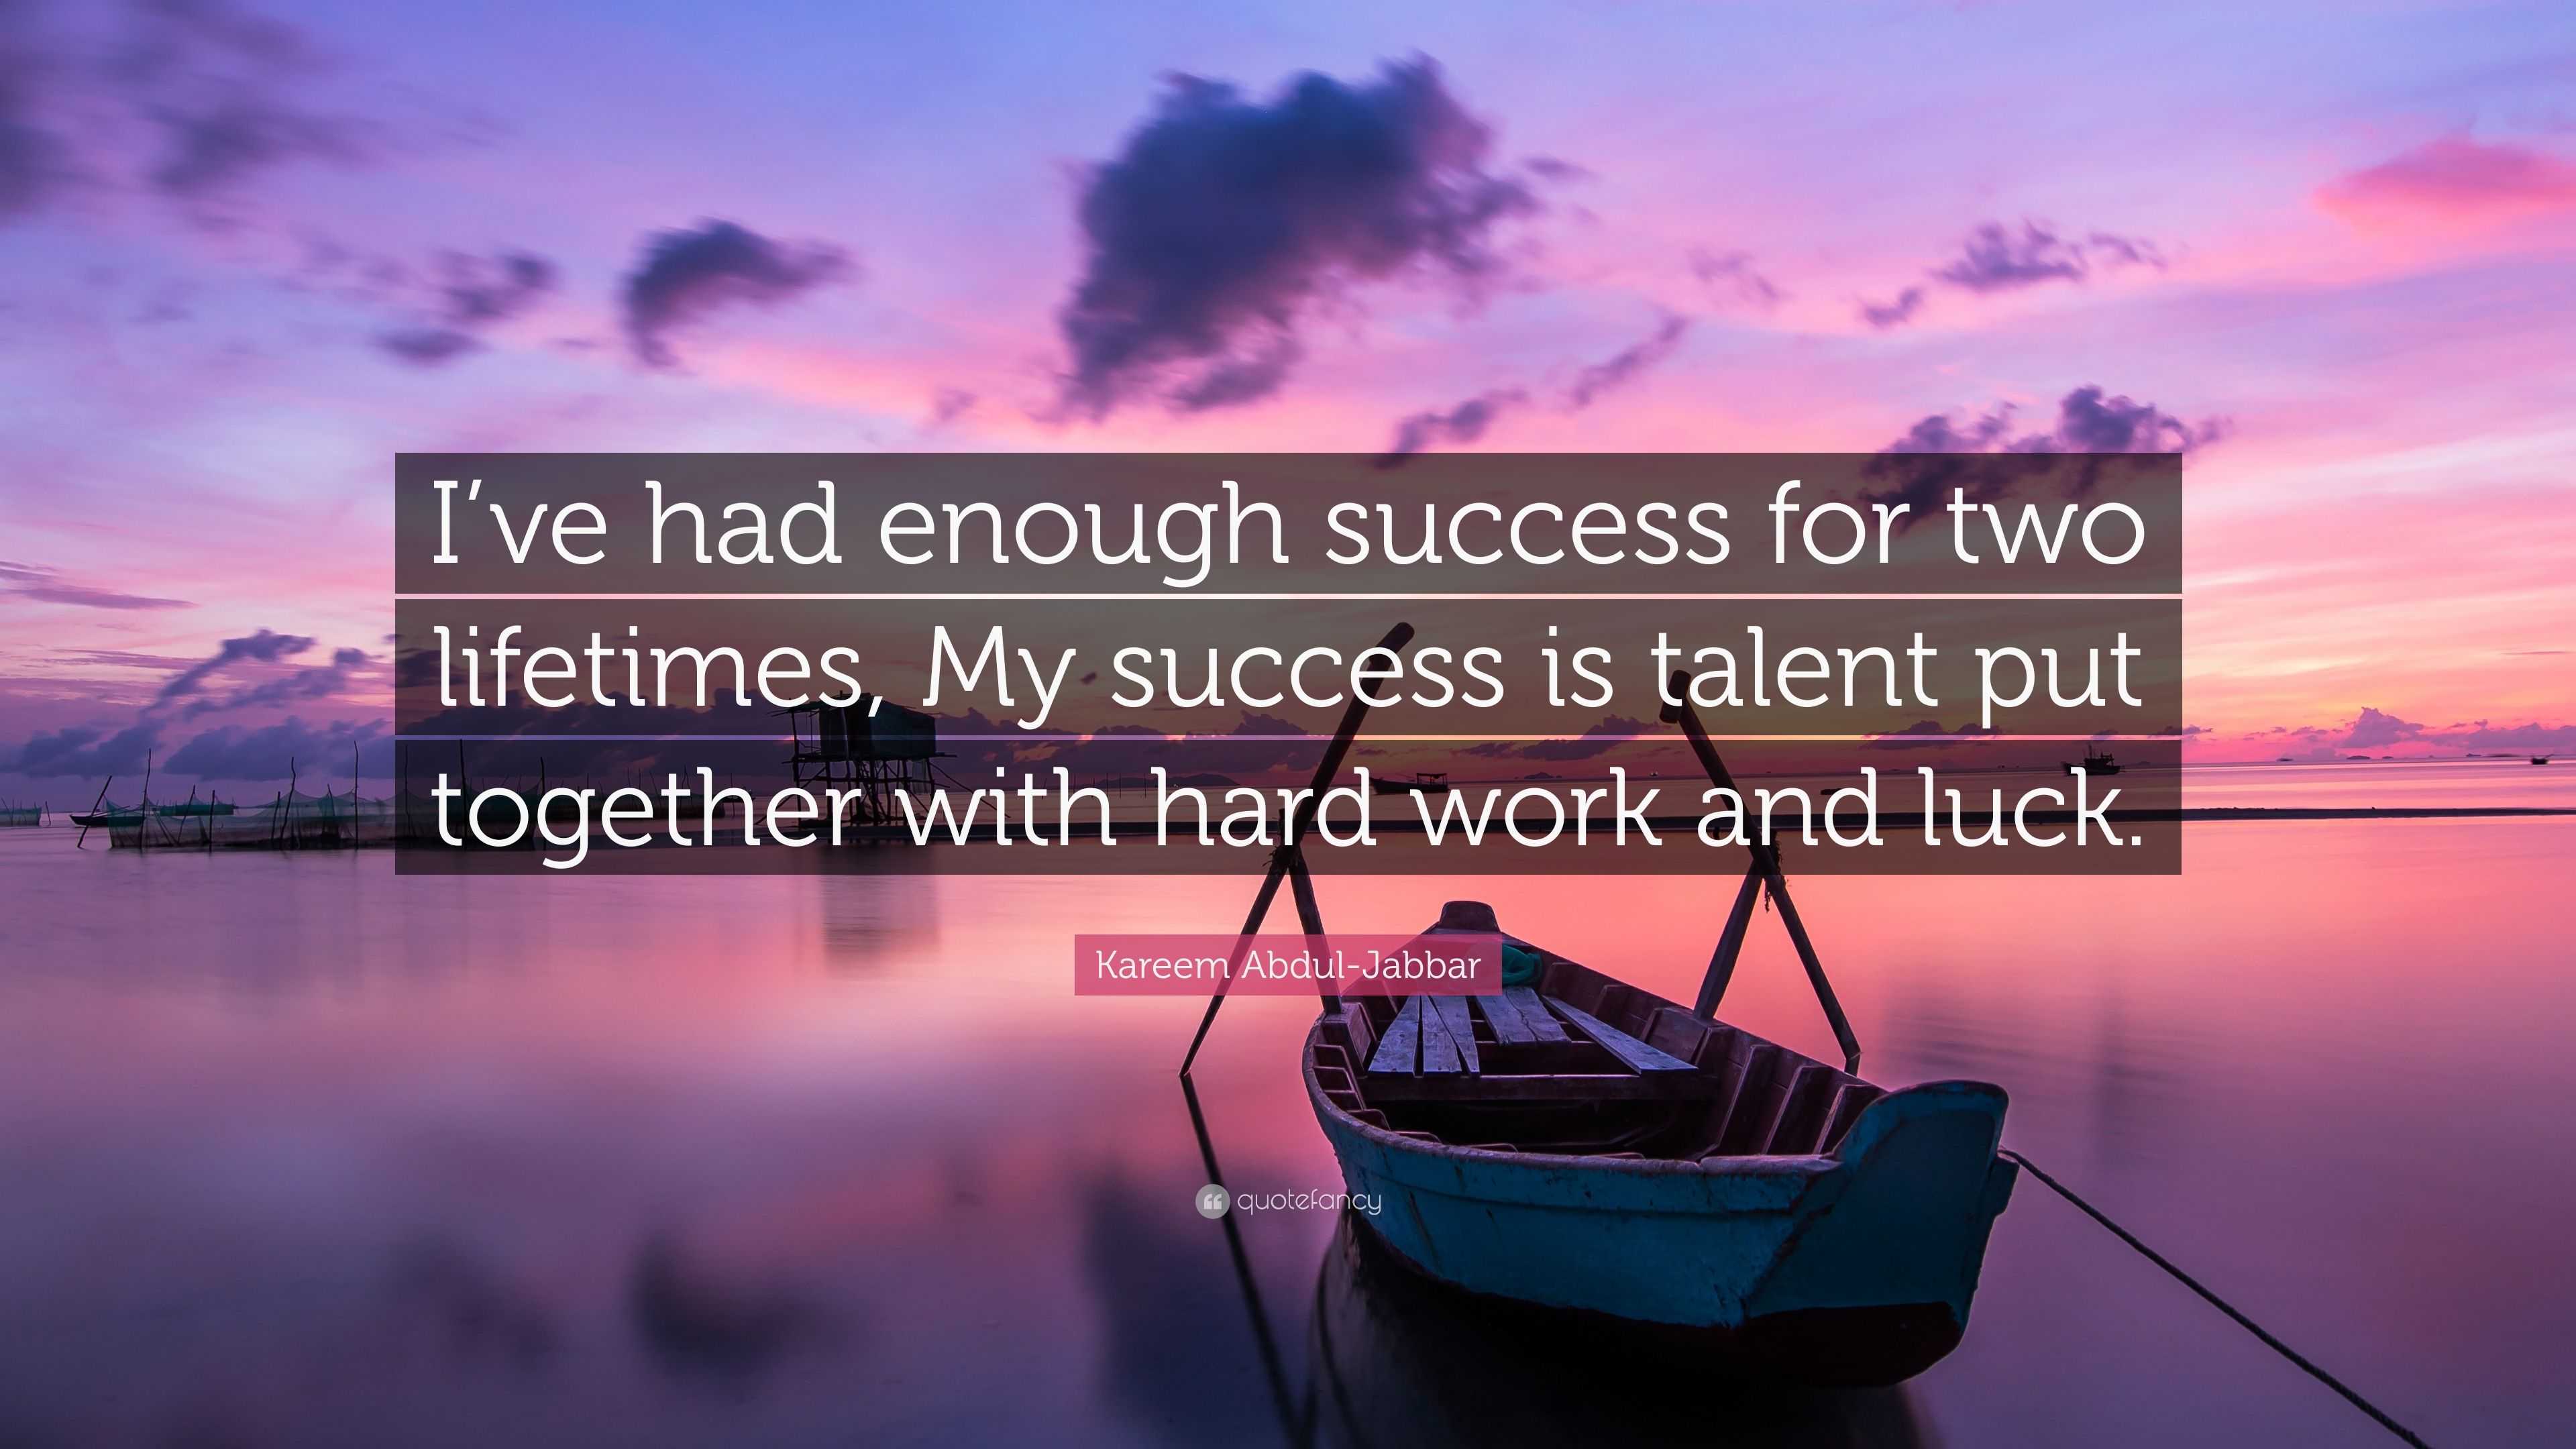 Kareem Abdul-Jabbar Quote: “I’ve had enough success for two lifetimes ...